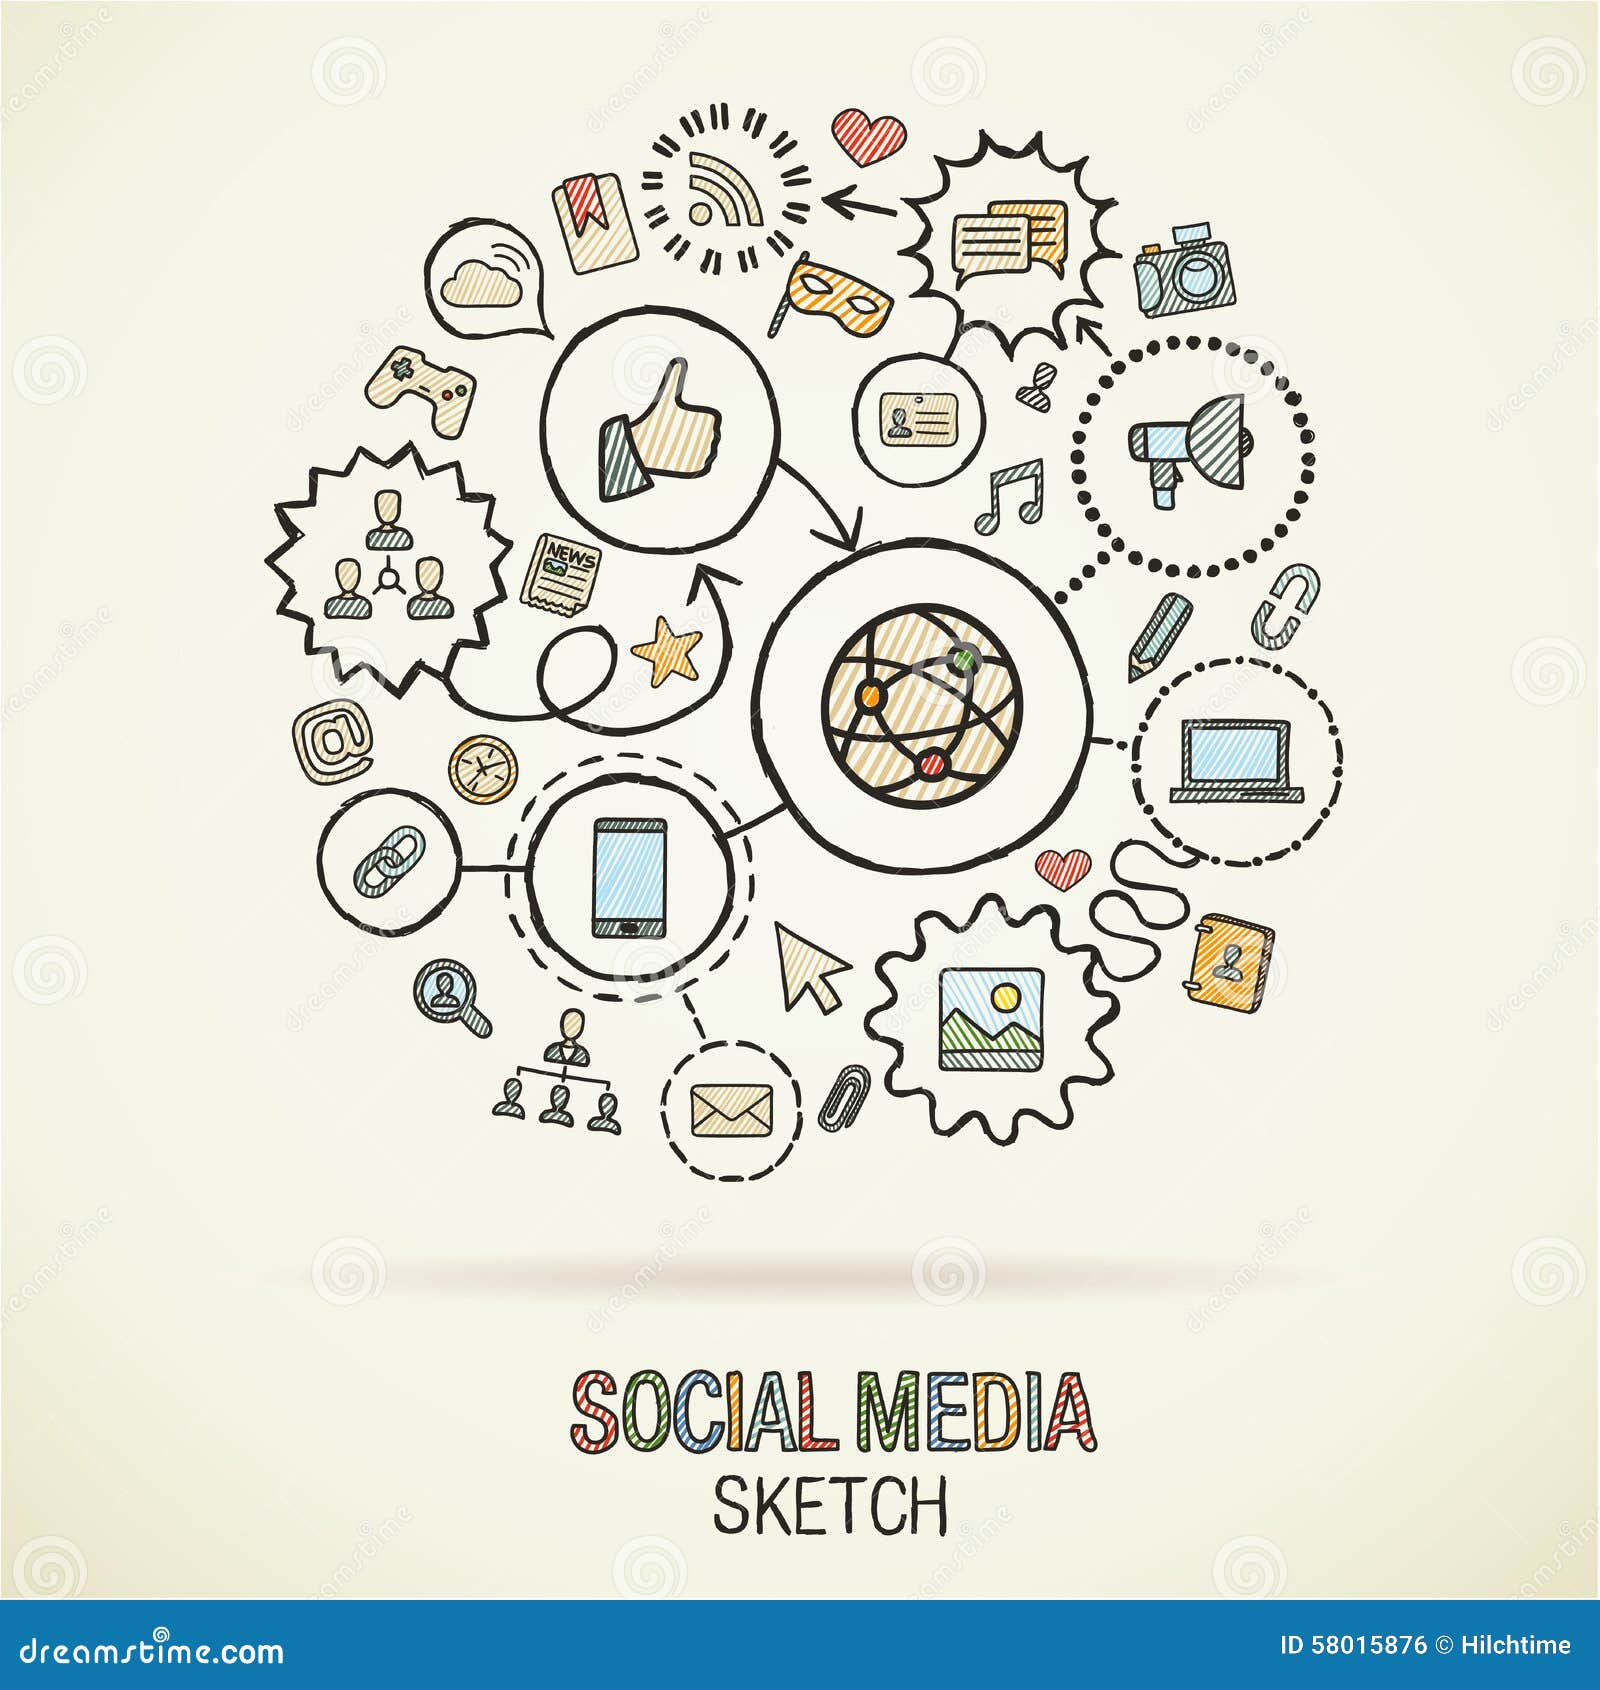 Social media hand drawn icon set sketch of like www internet messaging  concepts technology icons  click wifi shopping  CanStock